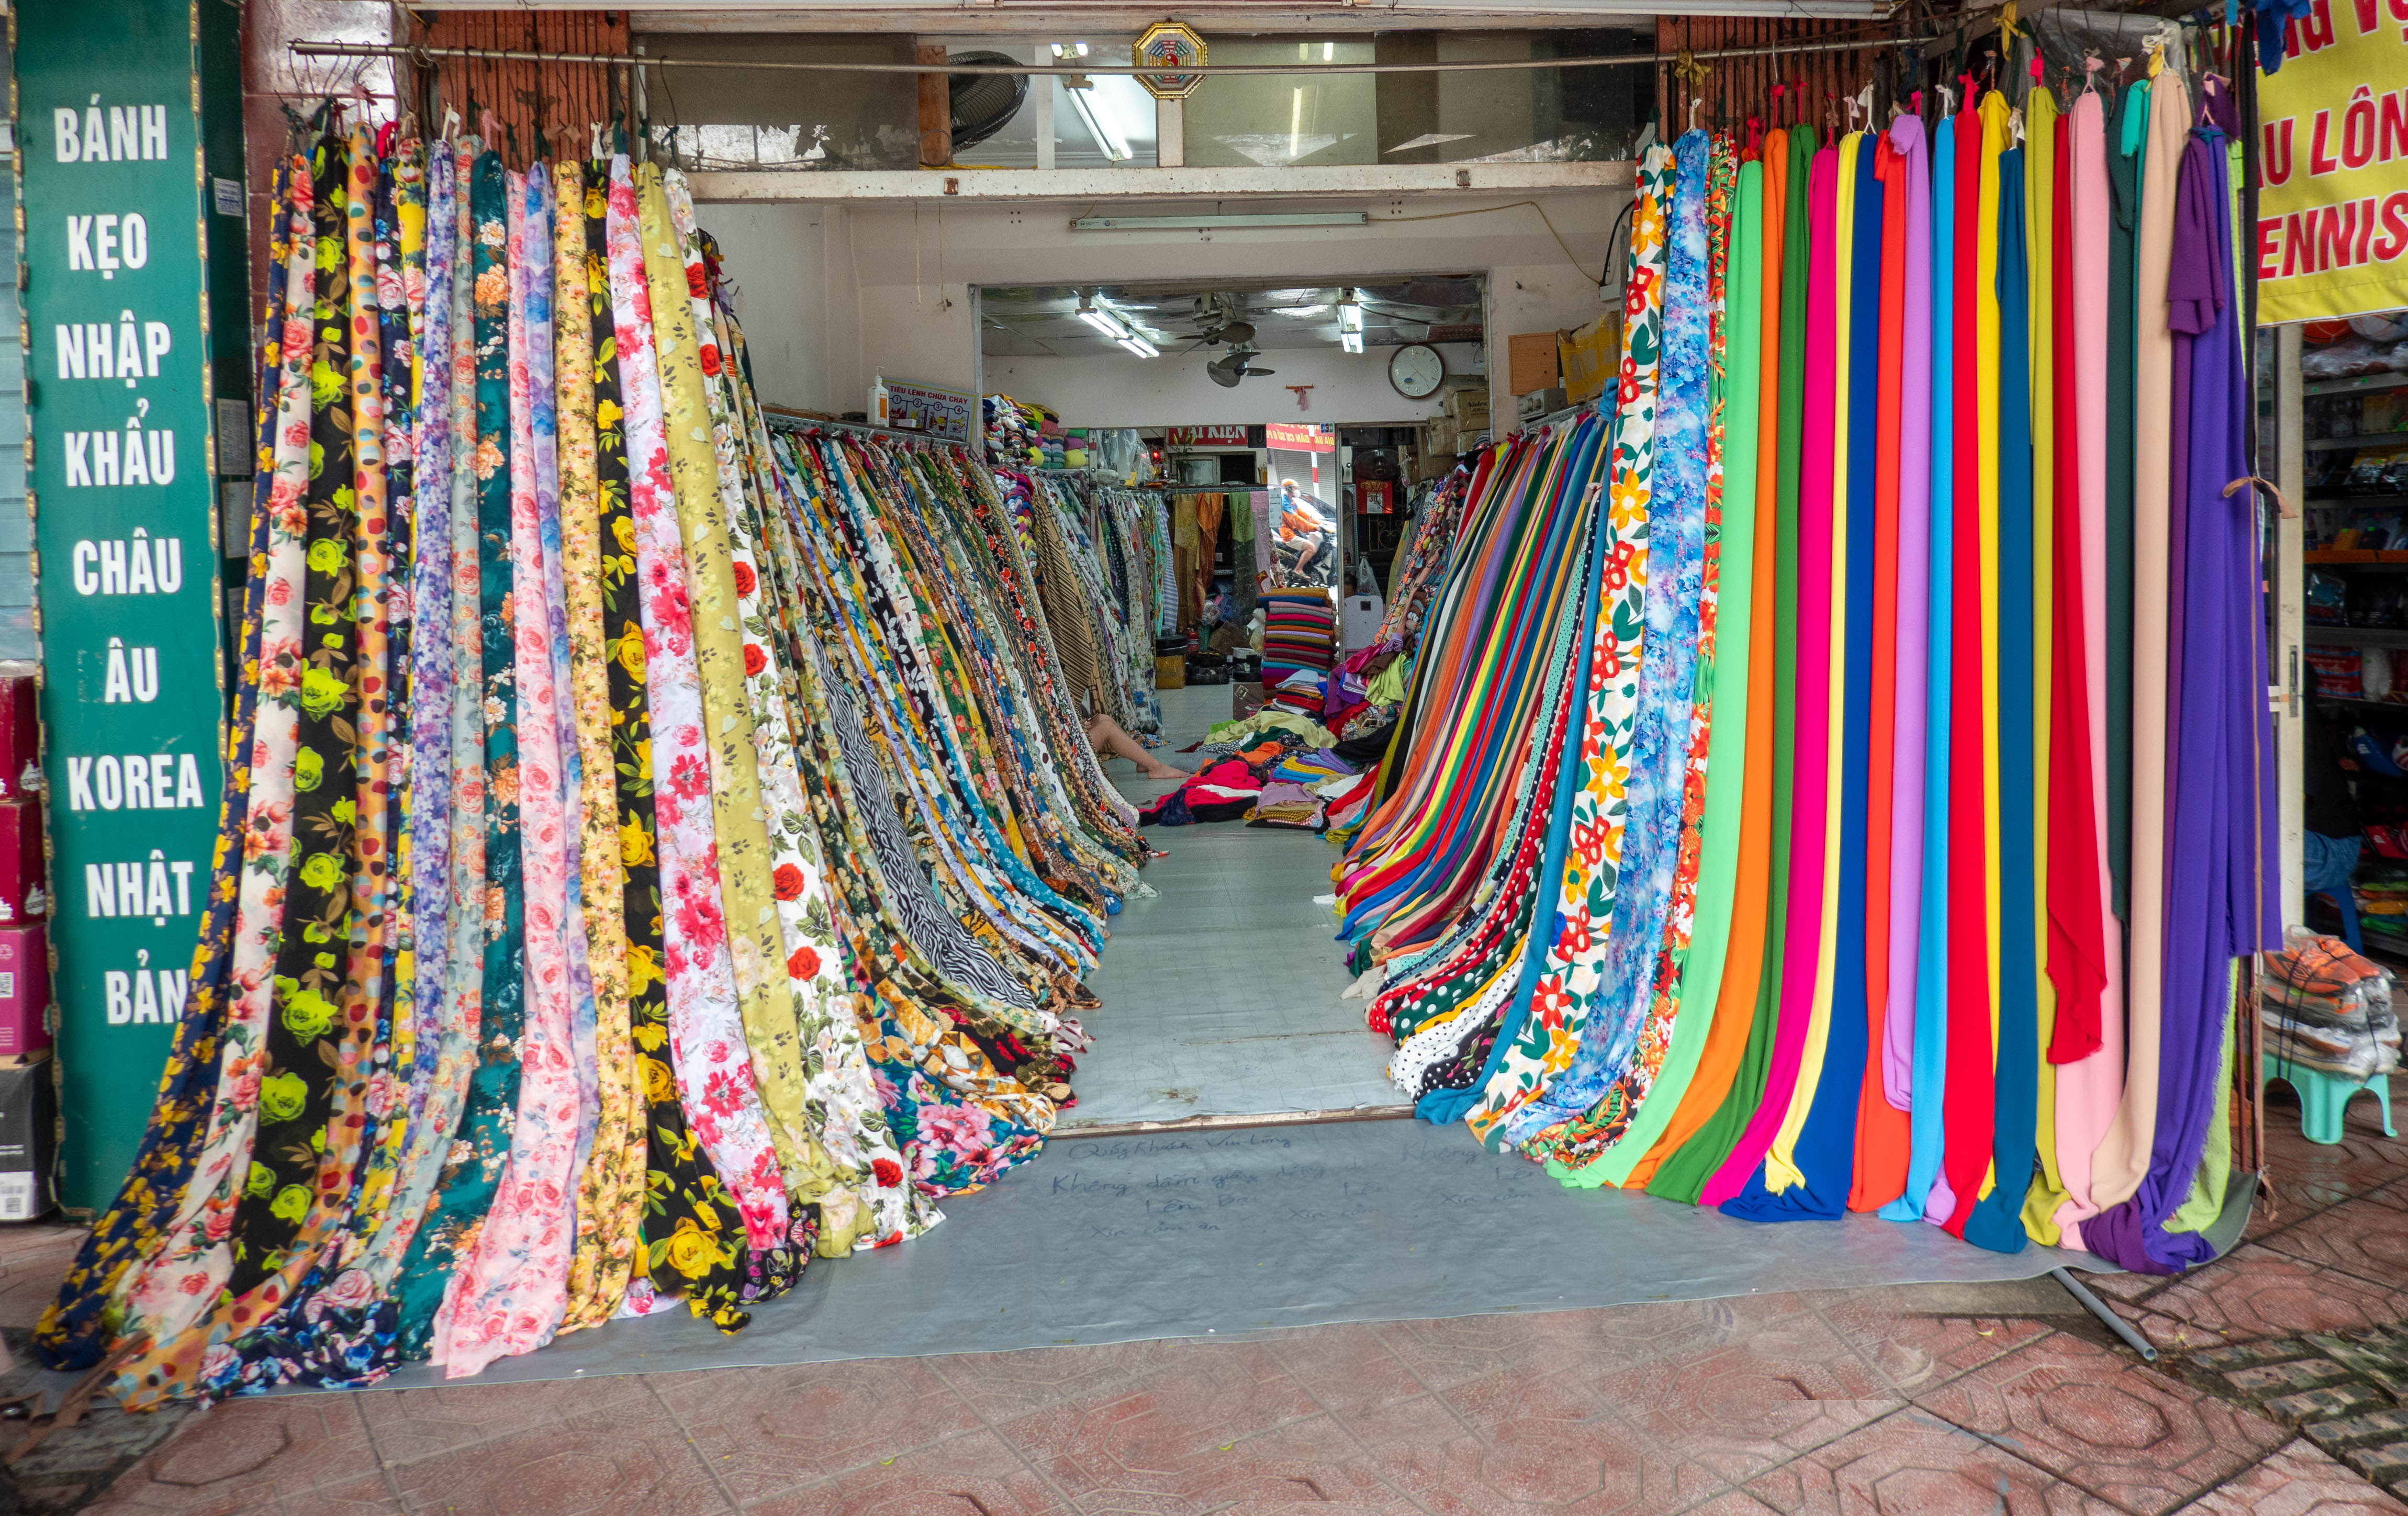 Picture of looking into a fabric shop with vertically hanging multi-patterned, colored fabric samples on left side of entrance hanging from the entrance back into the back of the store and solid colored samples on right side doing the same. Three quarters of the way back into the shop on the left side there is a person sitting among the samples but all you can see is the leg sticking out.